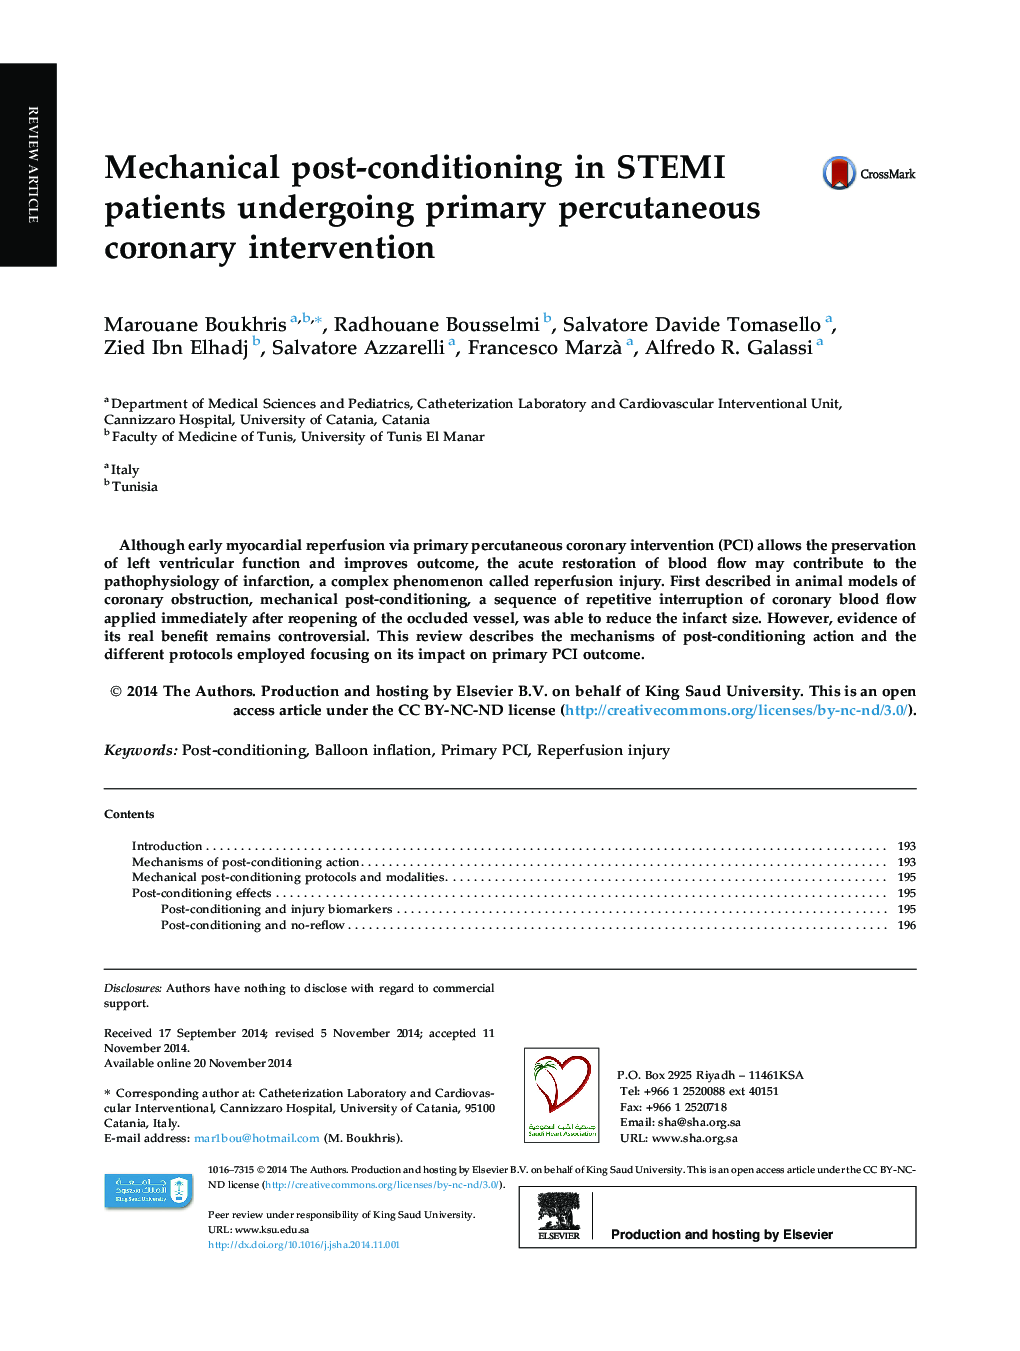 Mechanical post-conditioning in STEMI patients undergoing primary percutaneous coronary intervention 